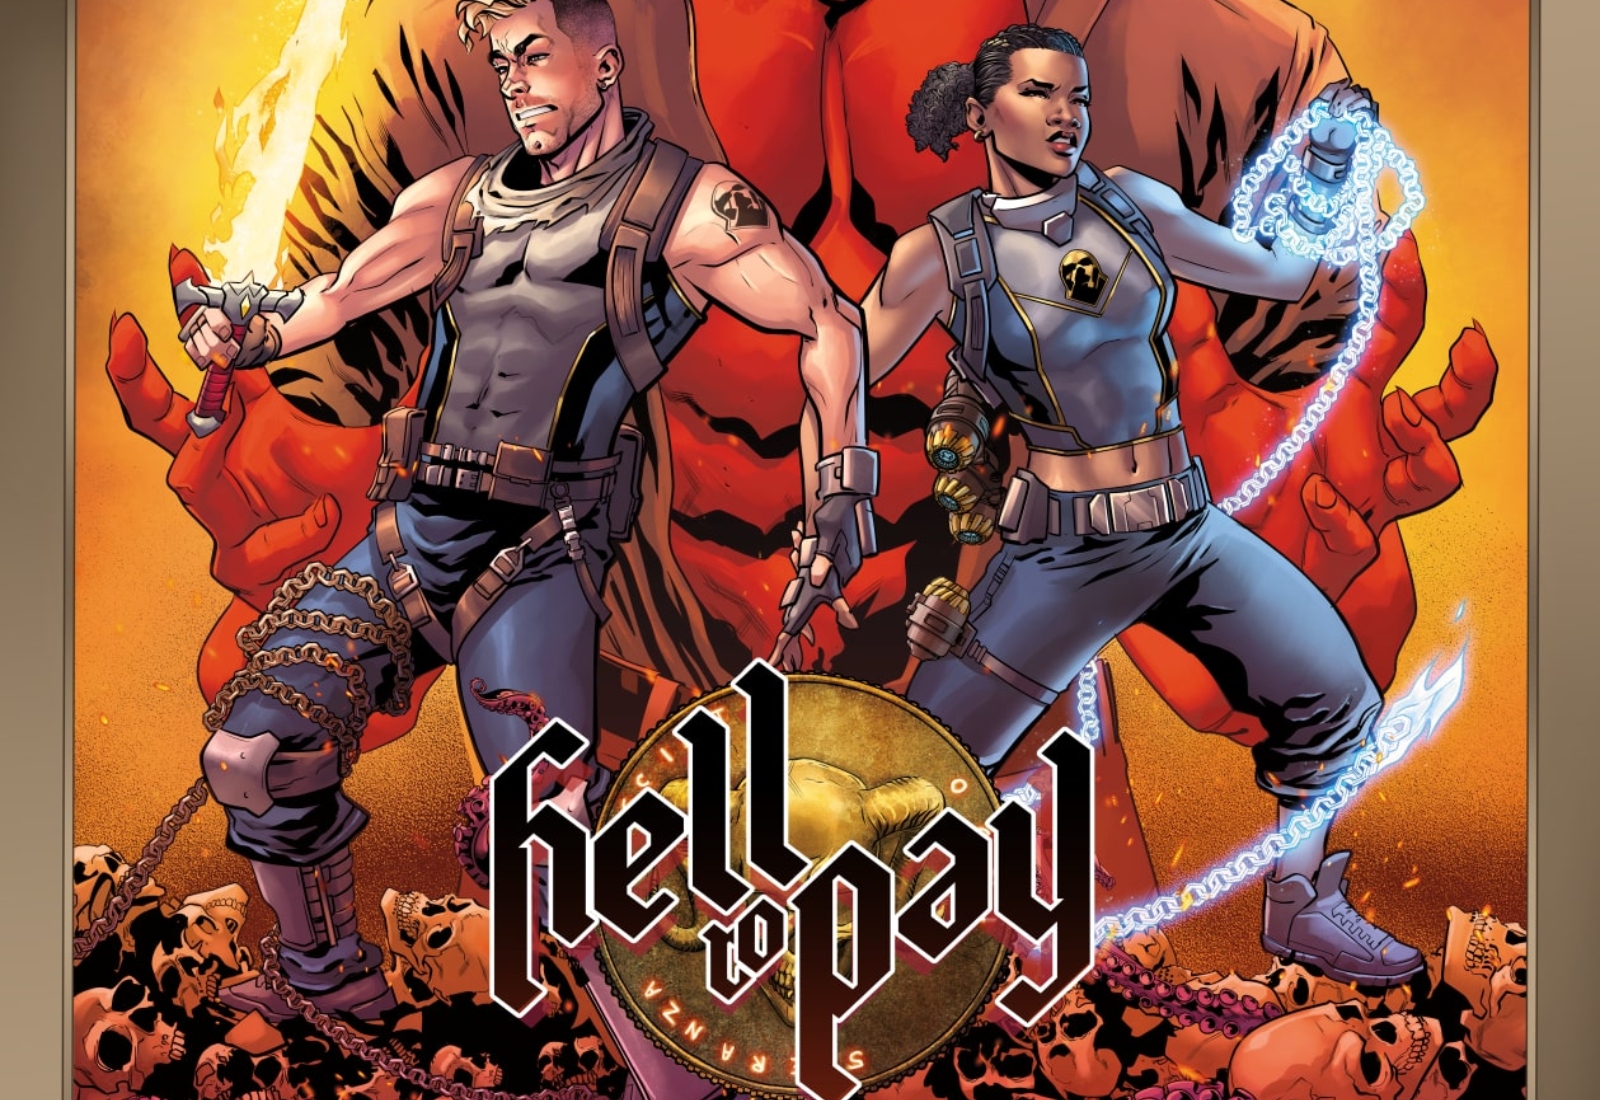 'Hell to Pay' #1 does a lot to win you over